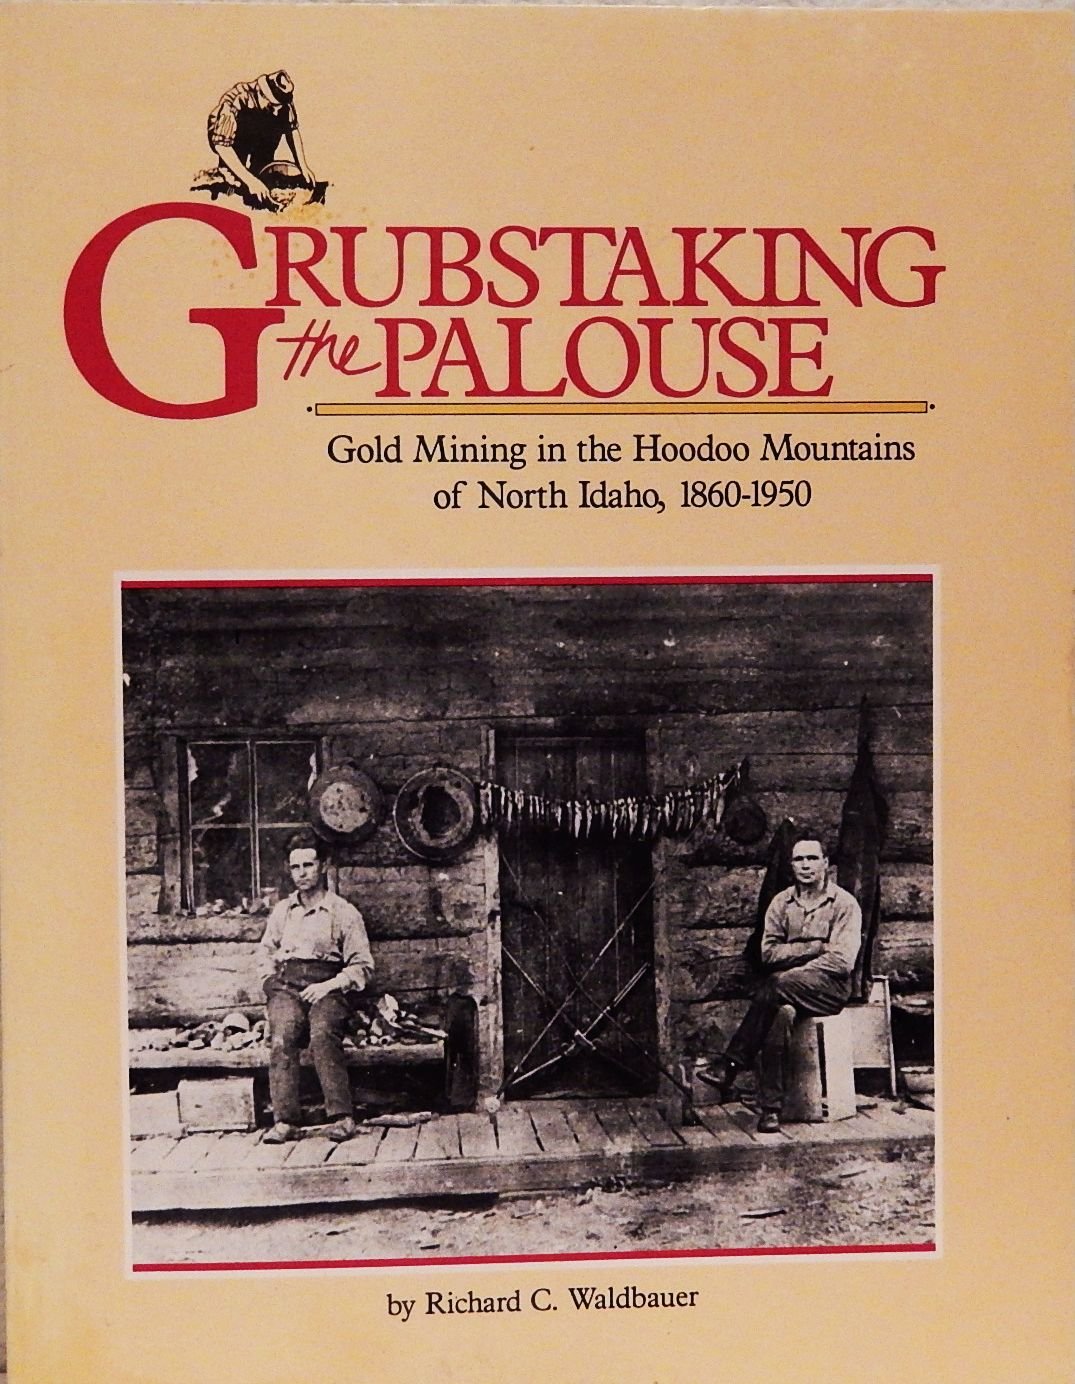 Grubstaking the Palouse: Gold mining in the Hoodoo Mountains of North Idaho, 1860-1950 (book cover)